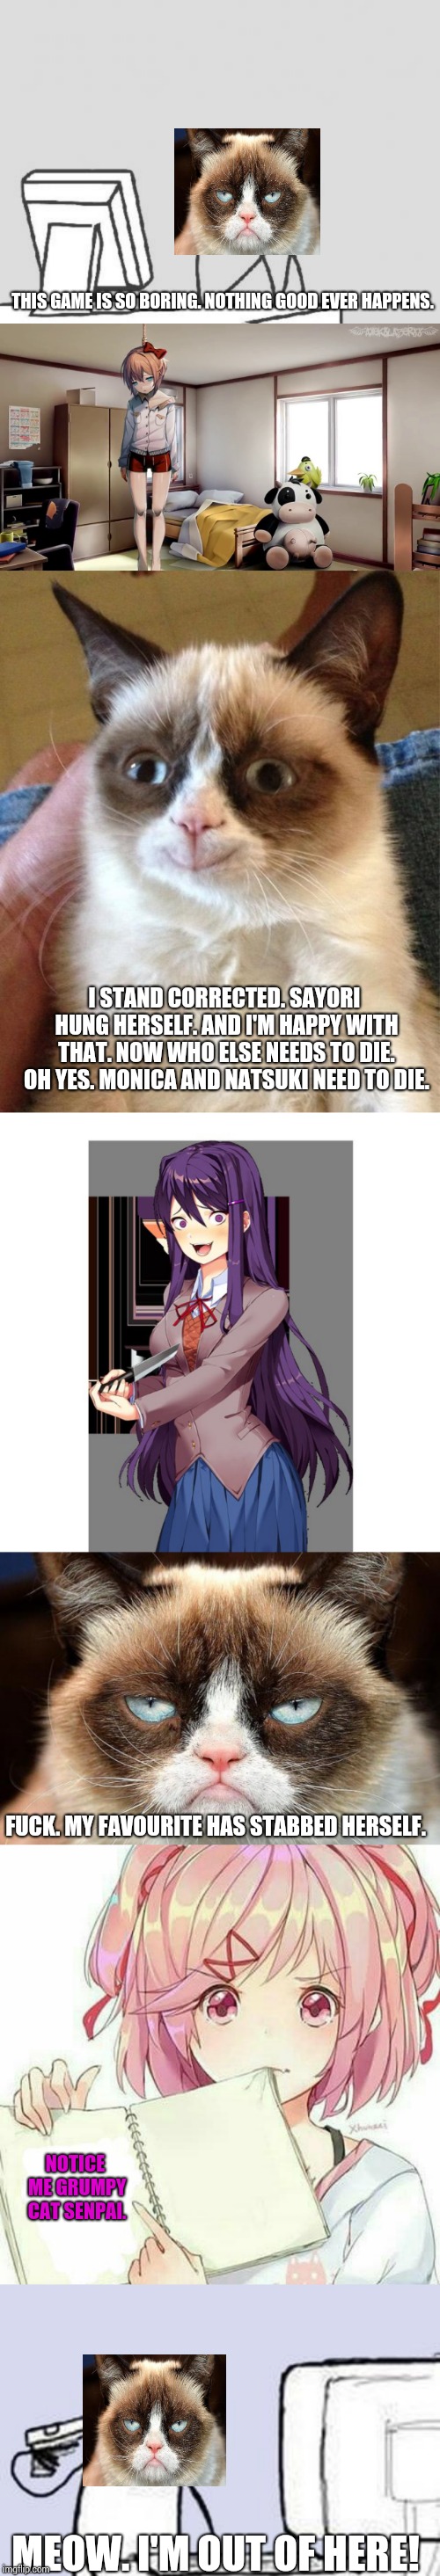 I didn't know grumpy cat plays DDLC?! | THIS GAME IS SO BORING. NOTHING GOOD EVER HAPPENS. I STAND CORRECTED. SAYORI HUNG HERSELF. AND I'M HAPPY WITH THAT. NOW WHO ELSE NEEDS TO DIE. OH YES. MONICA AND NATSUKI NEED TO DIE. FUCK. MY FAVOURITE HAS STABBED HERSELF. NOTICE ME GRUMPY CAT SENPAI. MEOW. I'M OUT OF HERE! | image tagged in memes,grumpy cat plays some ddlc,ddlc,grumpy cat | made w/ Imgflip meme maker